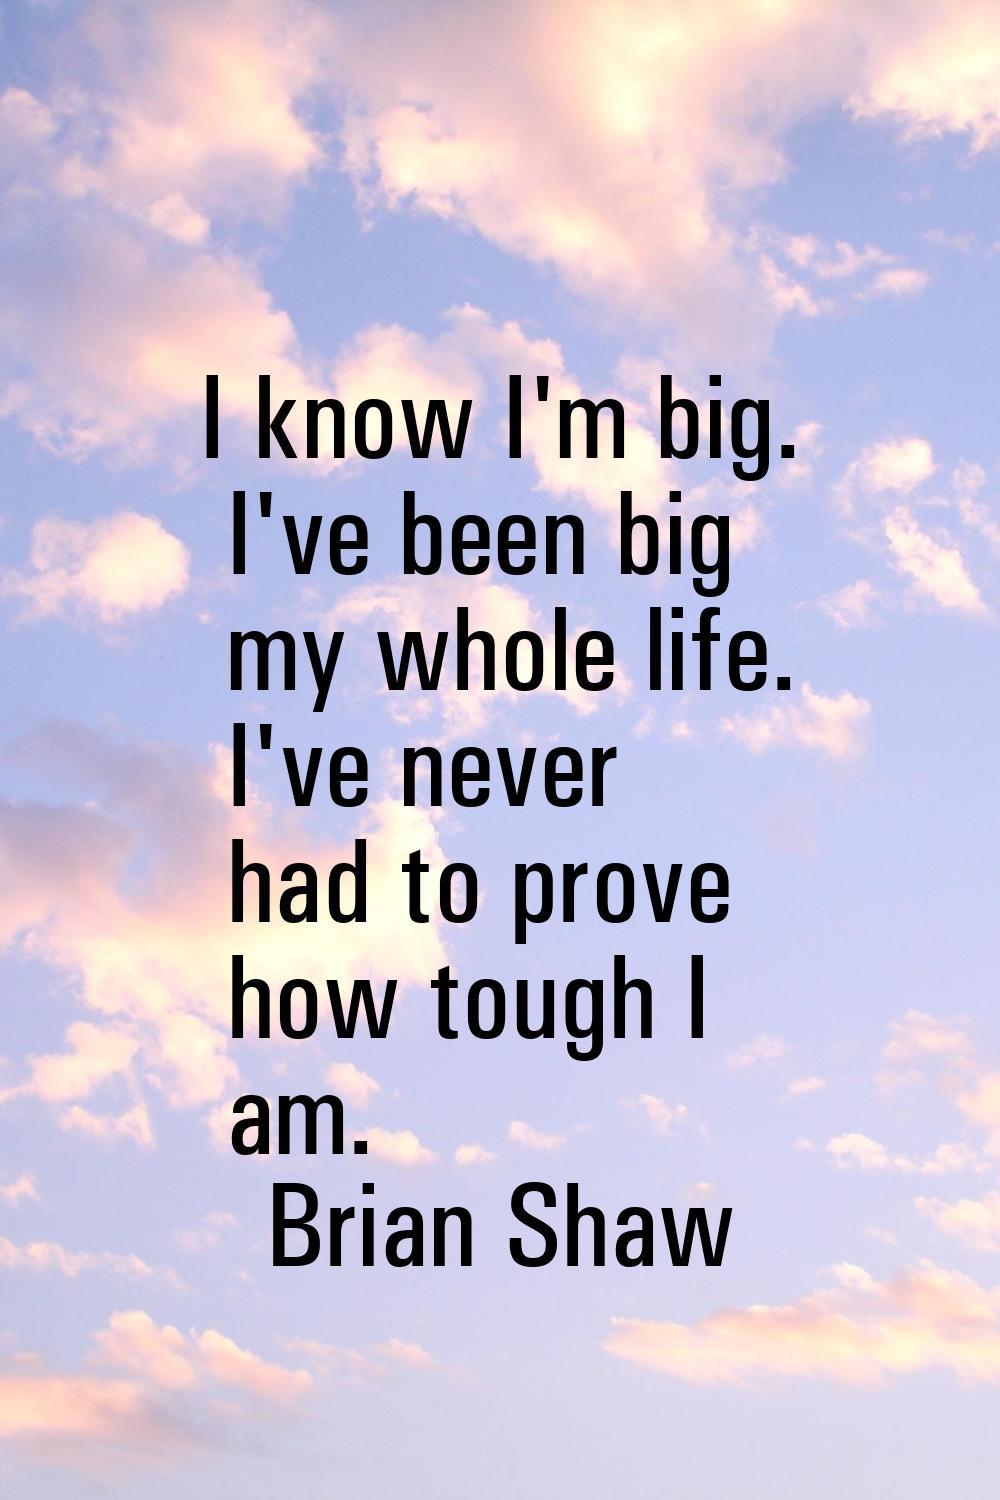 I know I'm big. I've been big my whole life. I've never had to prove how tough I am.